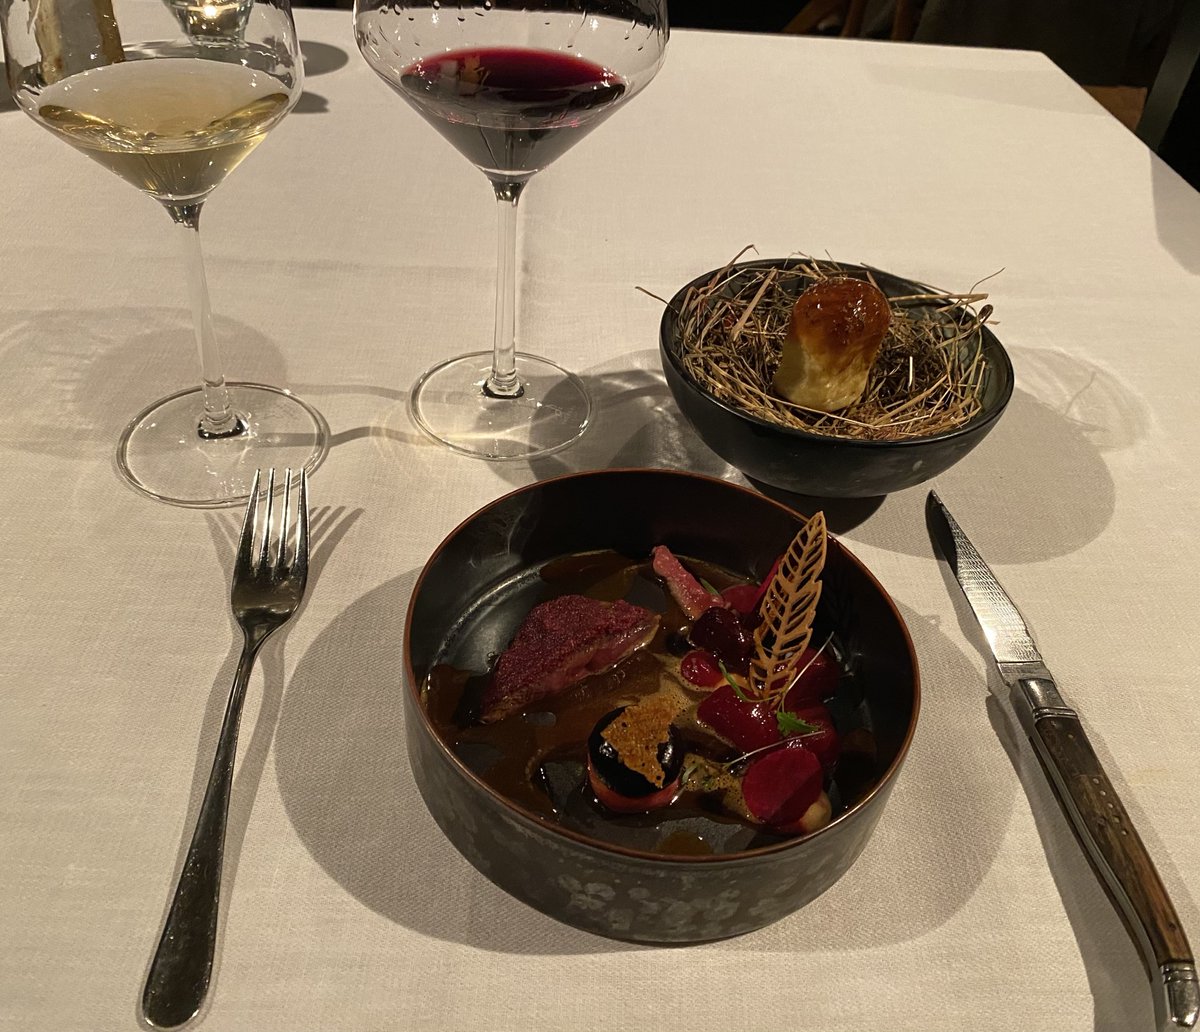 Dinner at Hiša Denk Restaurant – where the sommelier couldn't decide which wine was best with this beautiful pigeon, so gave me both 

#MICHELINStar

#Slovenia 
guide.michelin.com/gb/en/drava/zg…